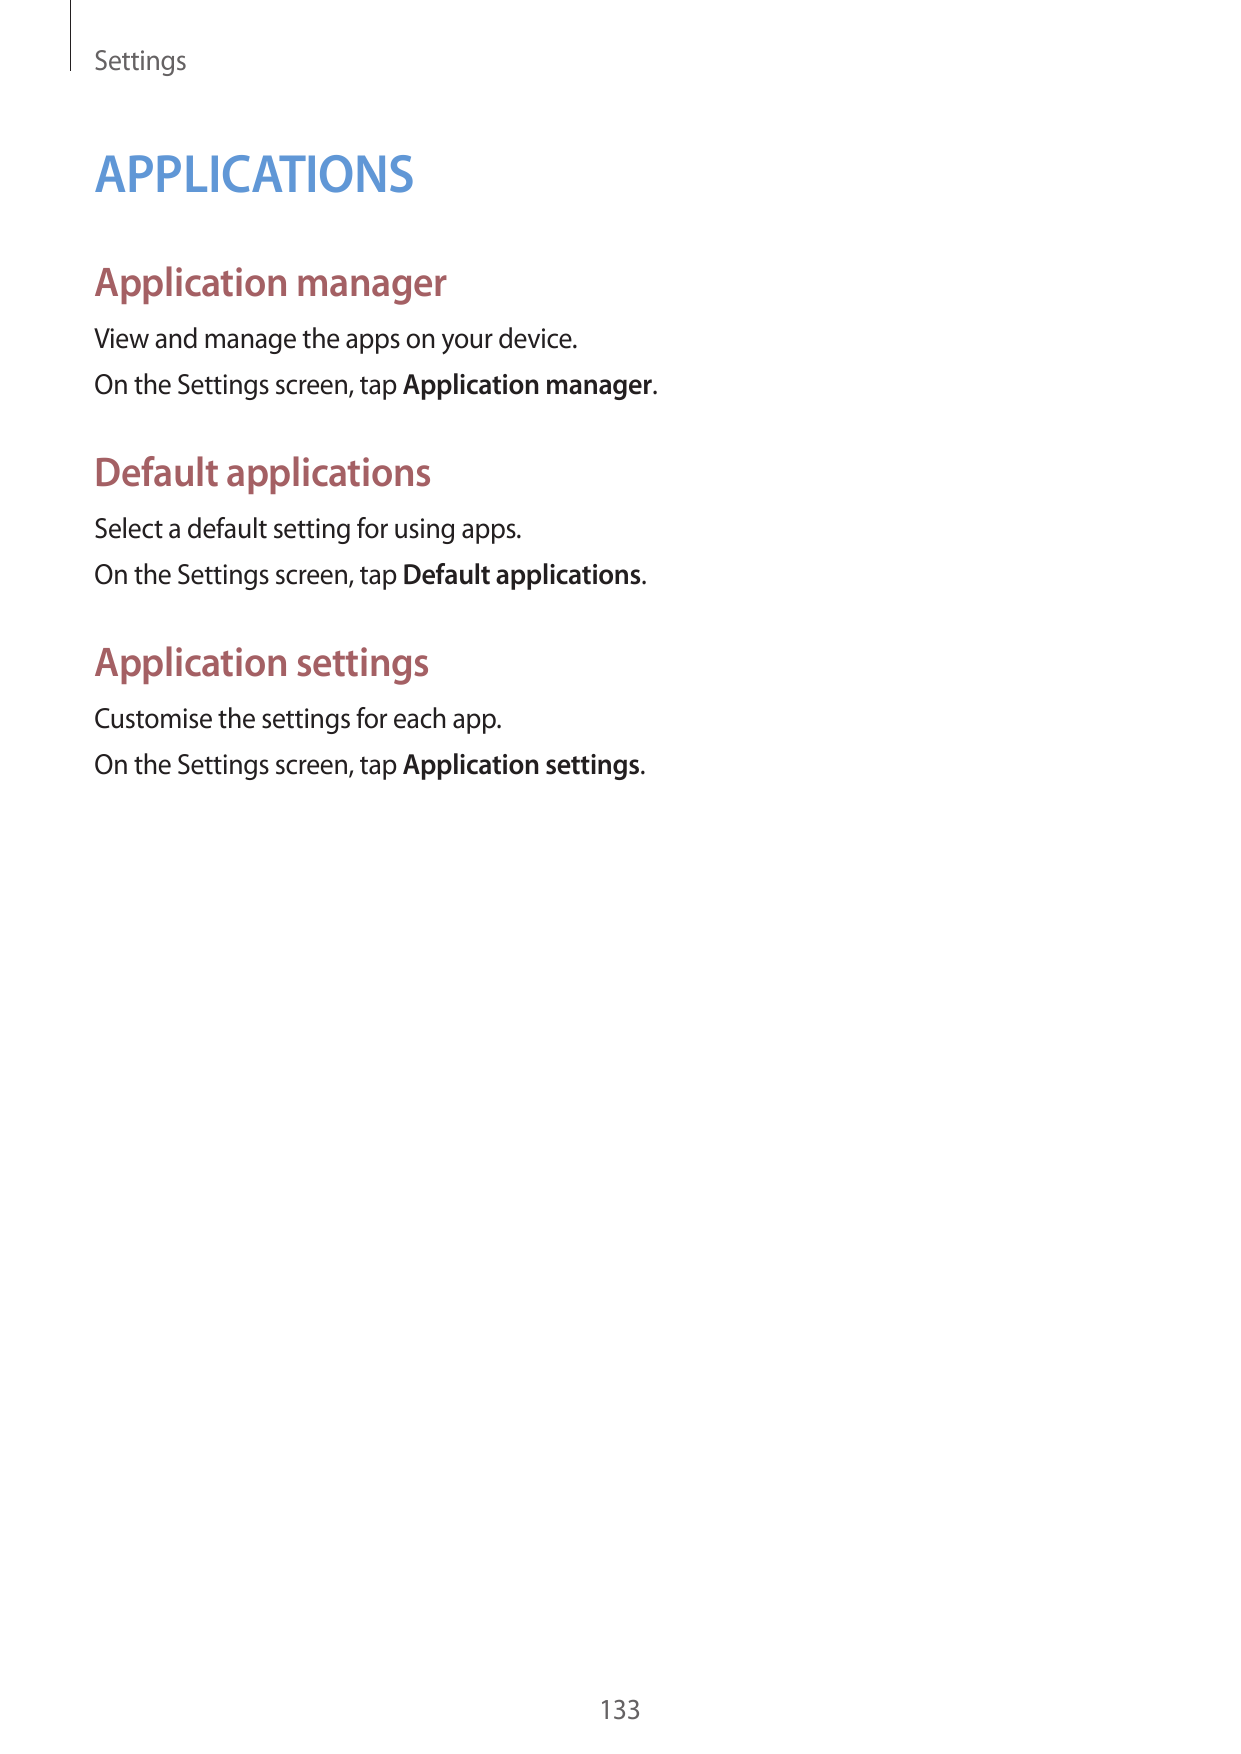 SettingsAPPLICATIONSApplication managerView and manage the apps on your device.On the Settings screen, tap Application manager.D